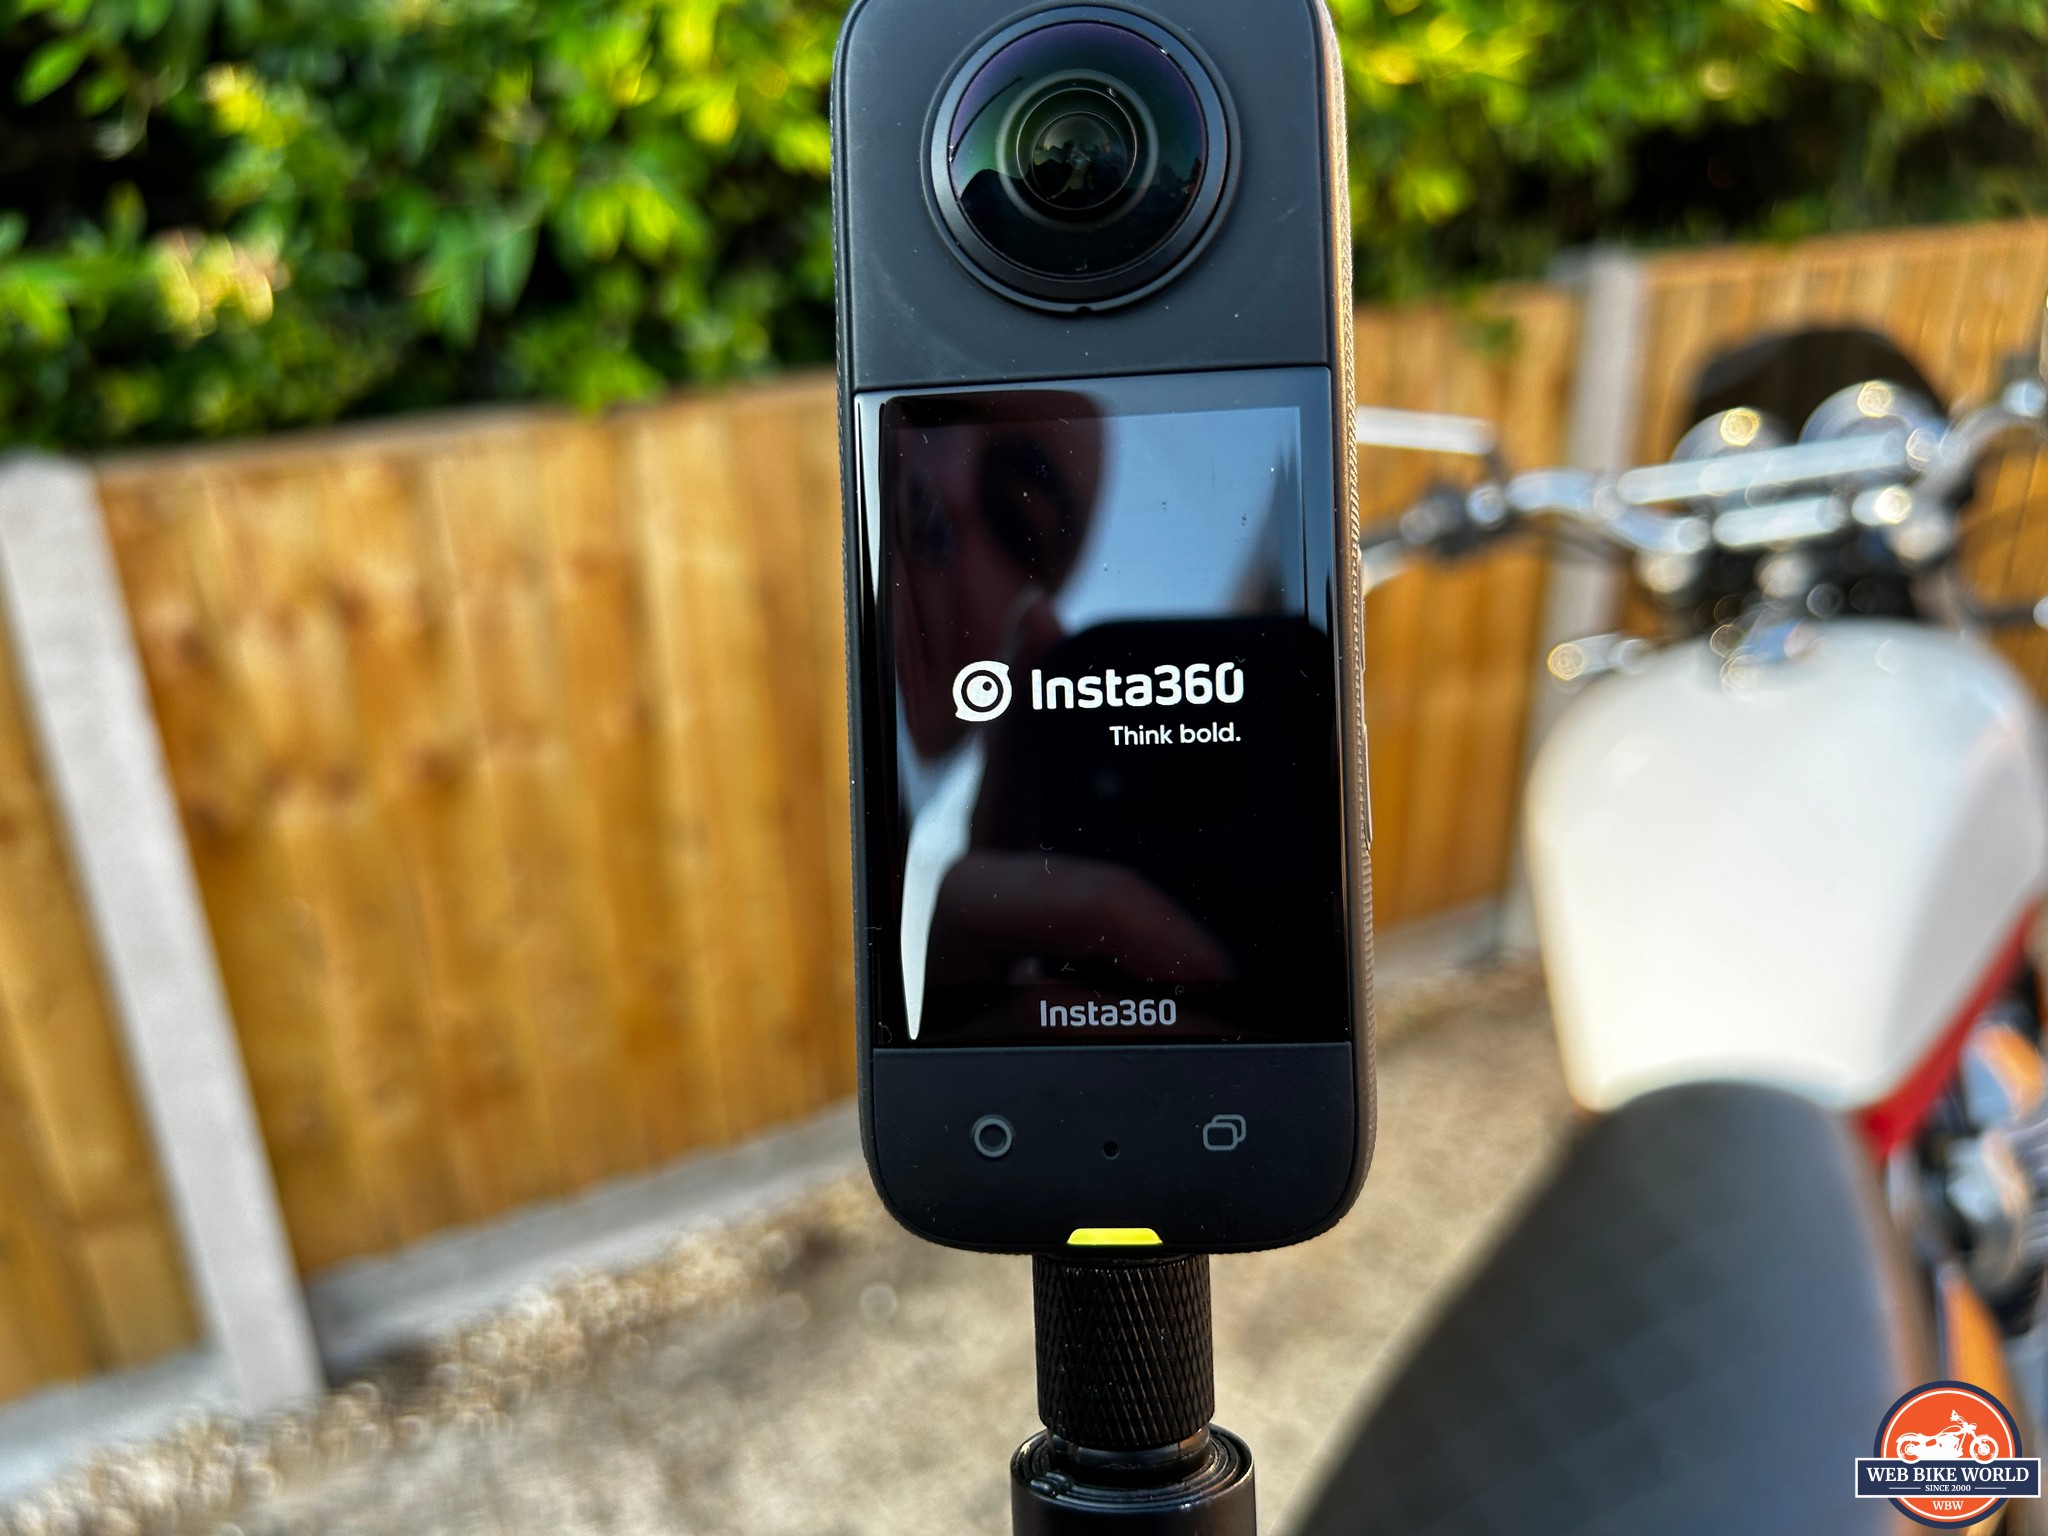 Insta360 X3 Review: The Ultimate Action + 360 Camera! 